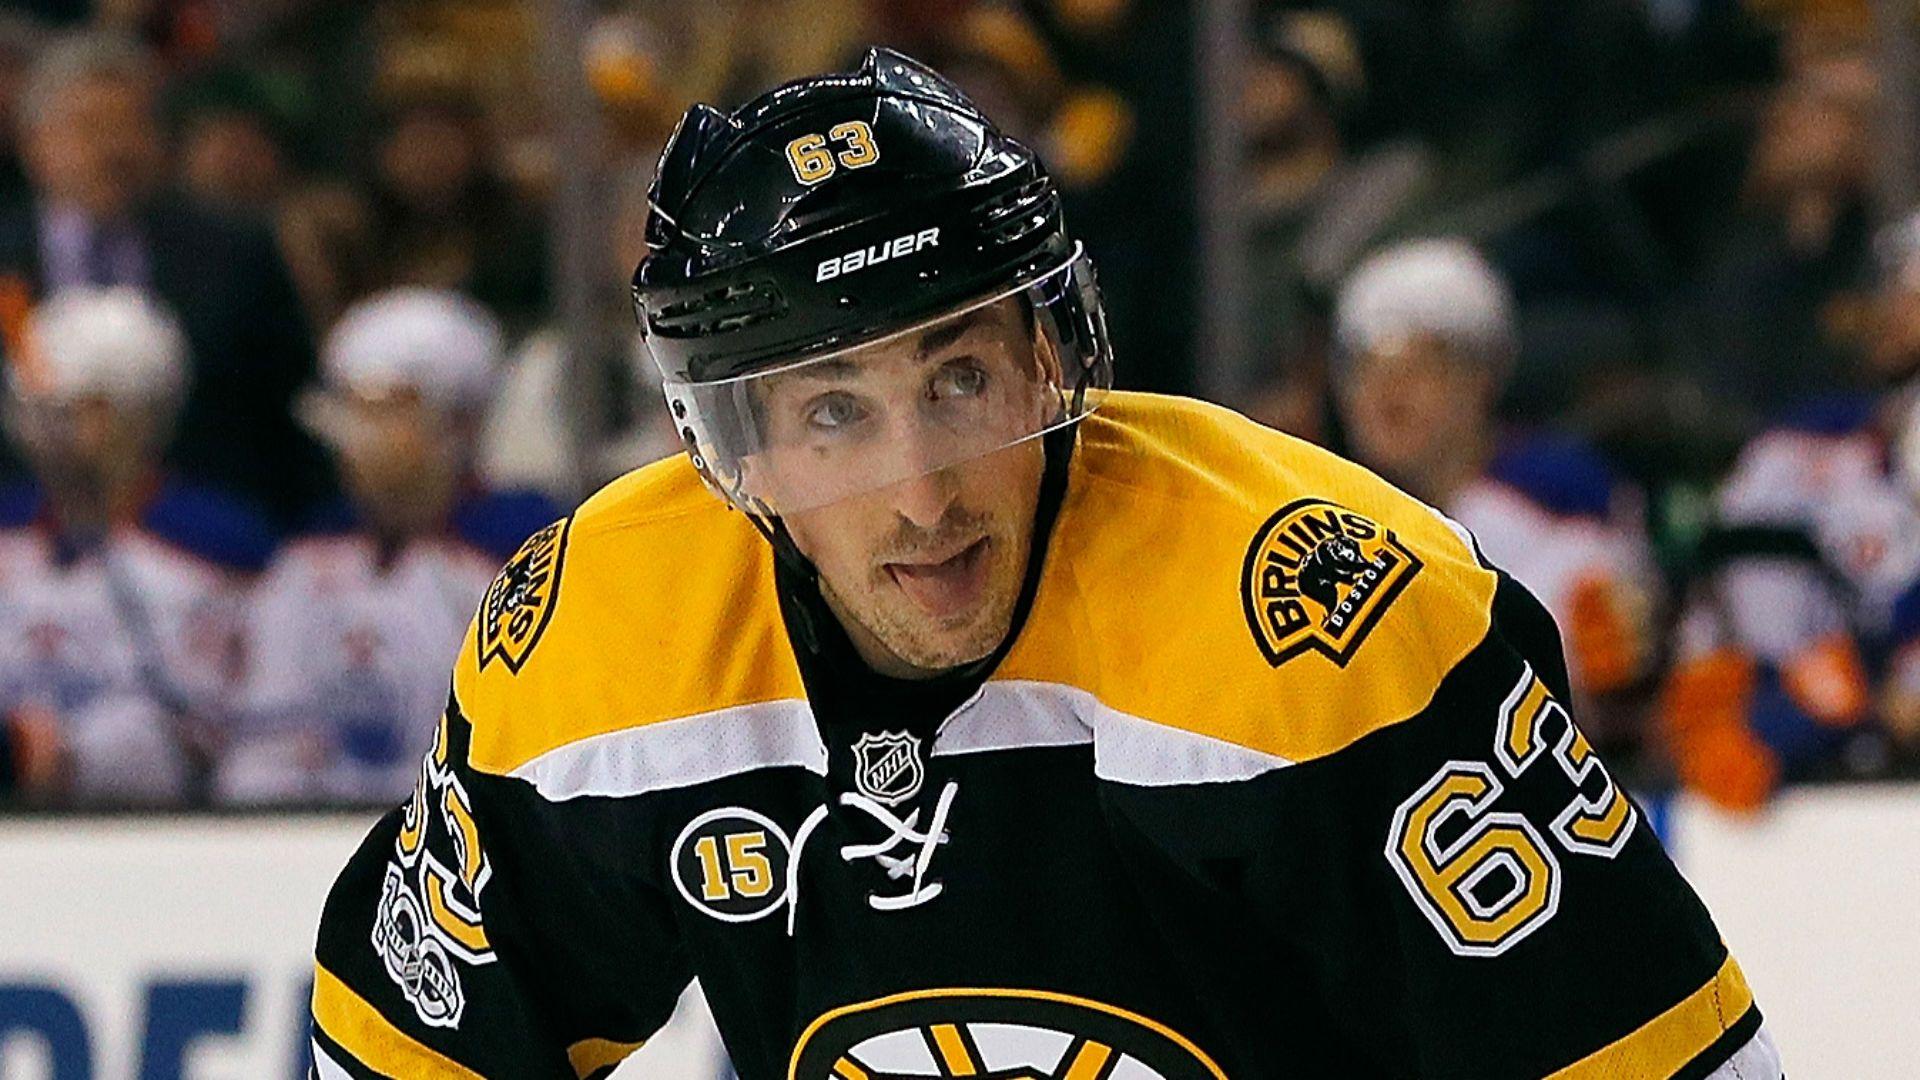 Bruins' Brad Marchand suspended 5 games for hit on Devils' Marcus